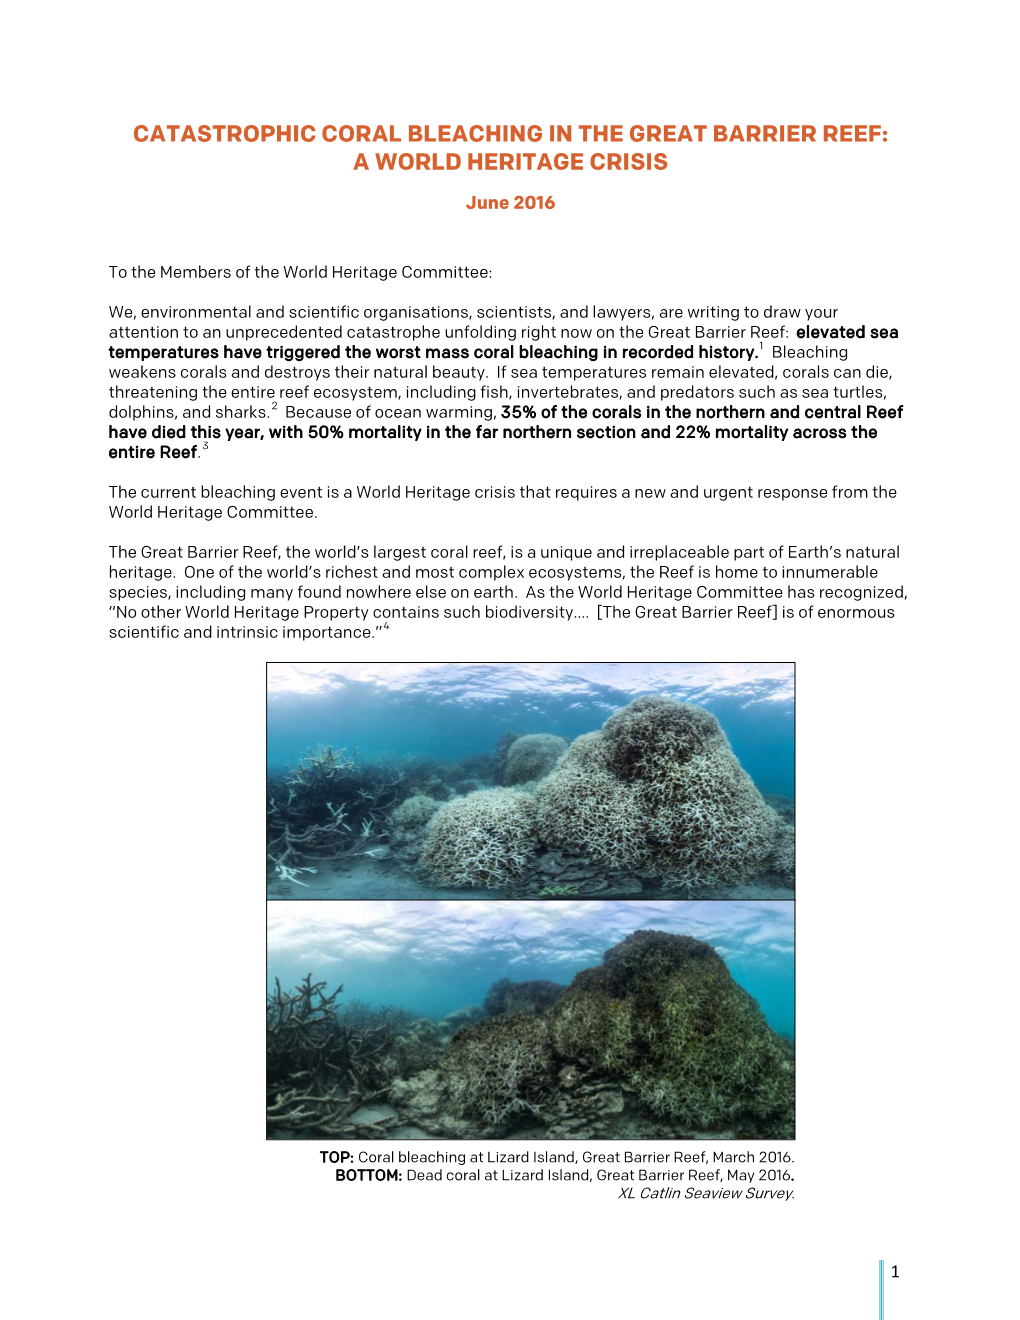 Catastrophic Coral Bleaching in the Great Barrier Reef: a World Heritage Crisis